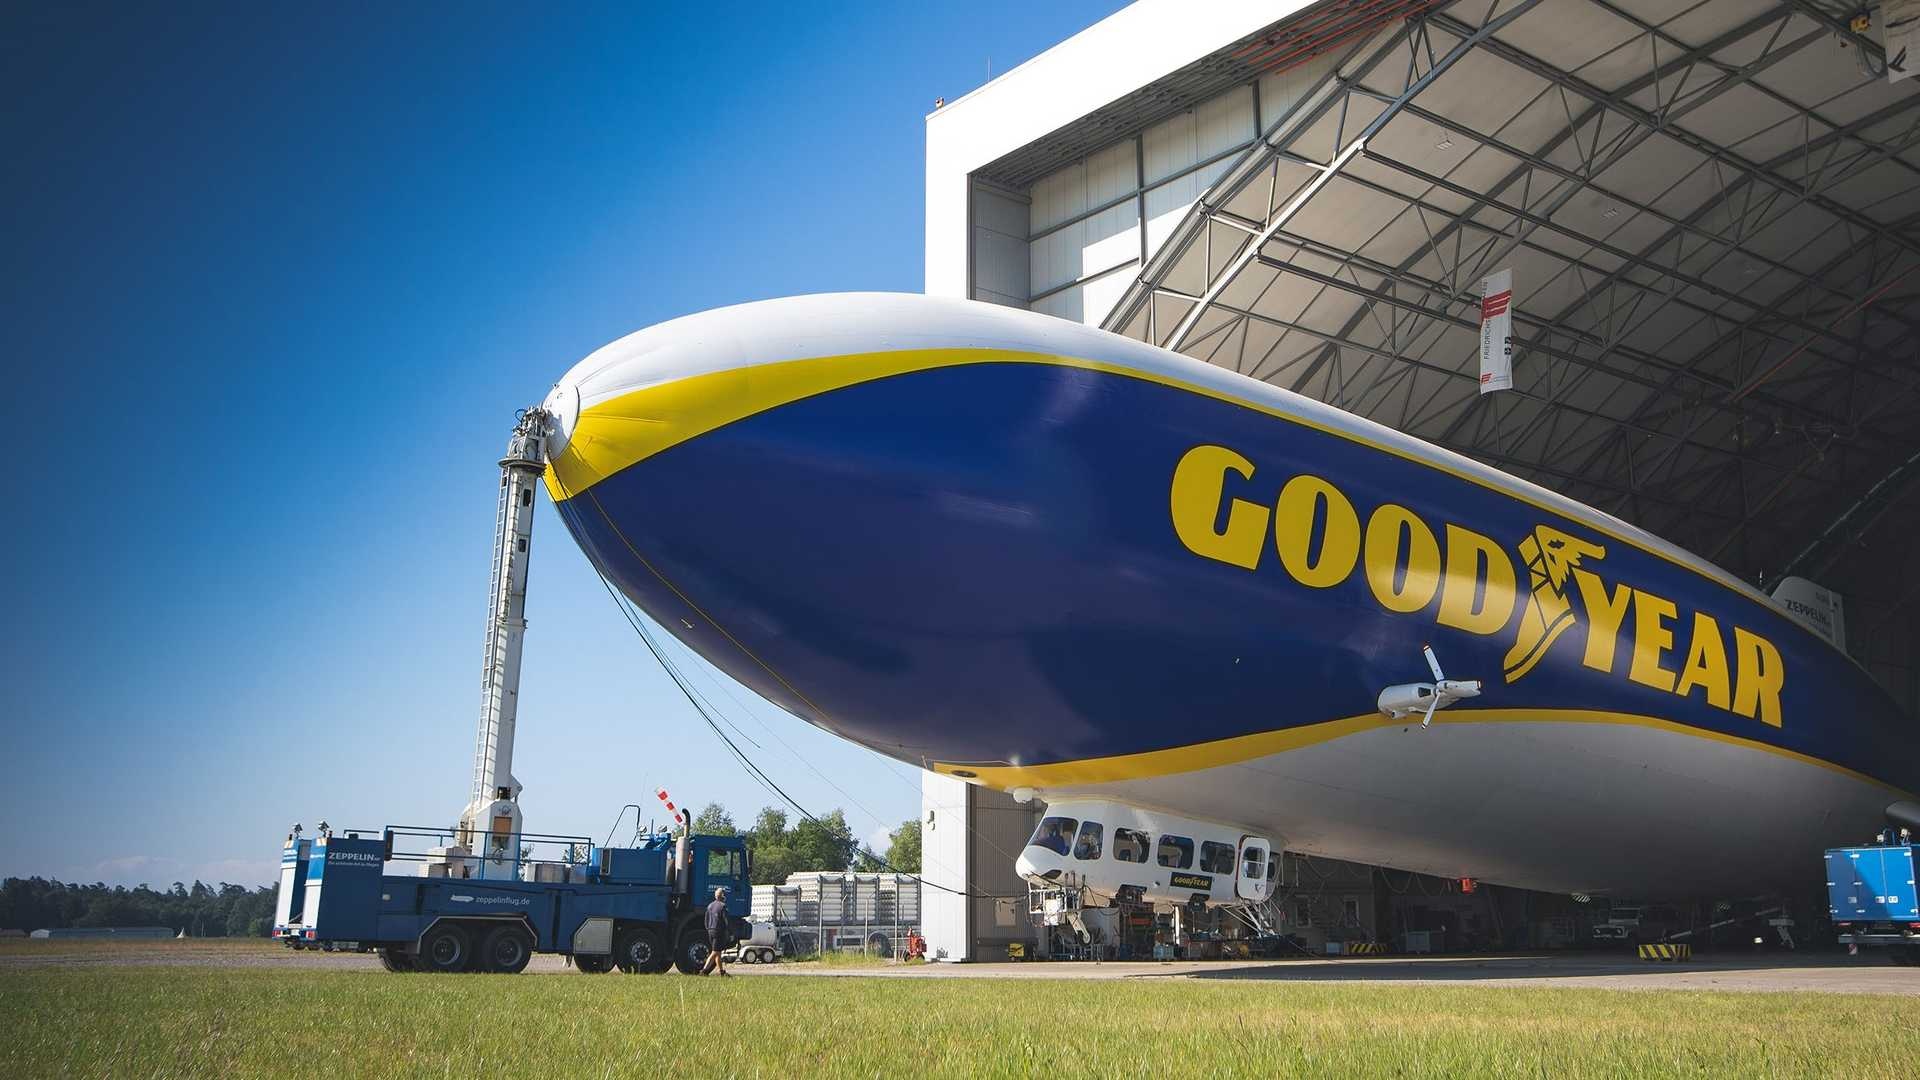 Dirigible: Goodyear, A type of aerostat that can navigate through the air under its own power. 1920x1080 Full HD Wallpaper.